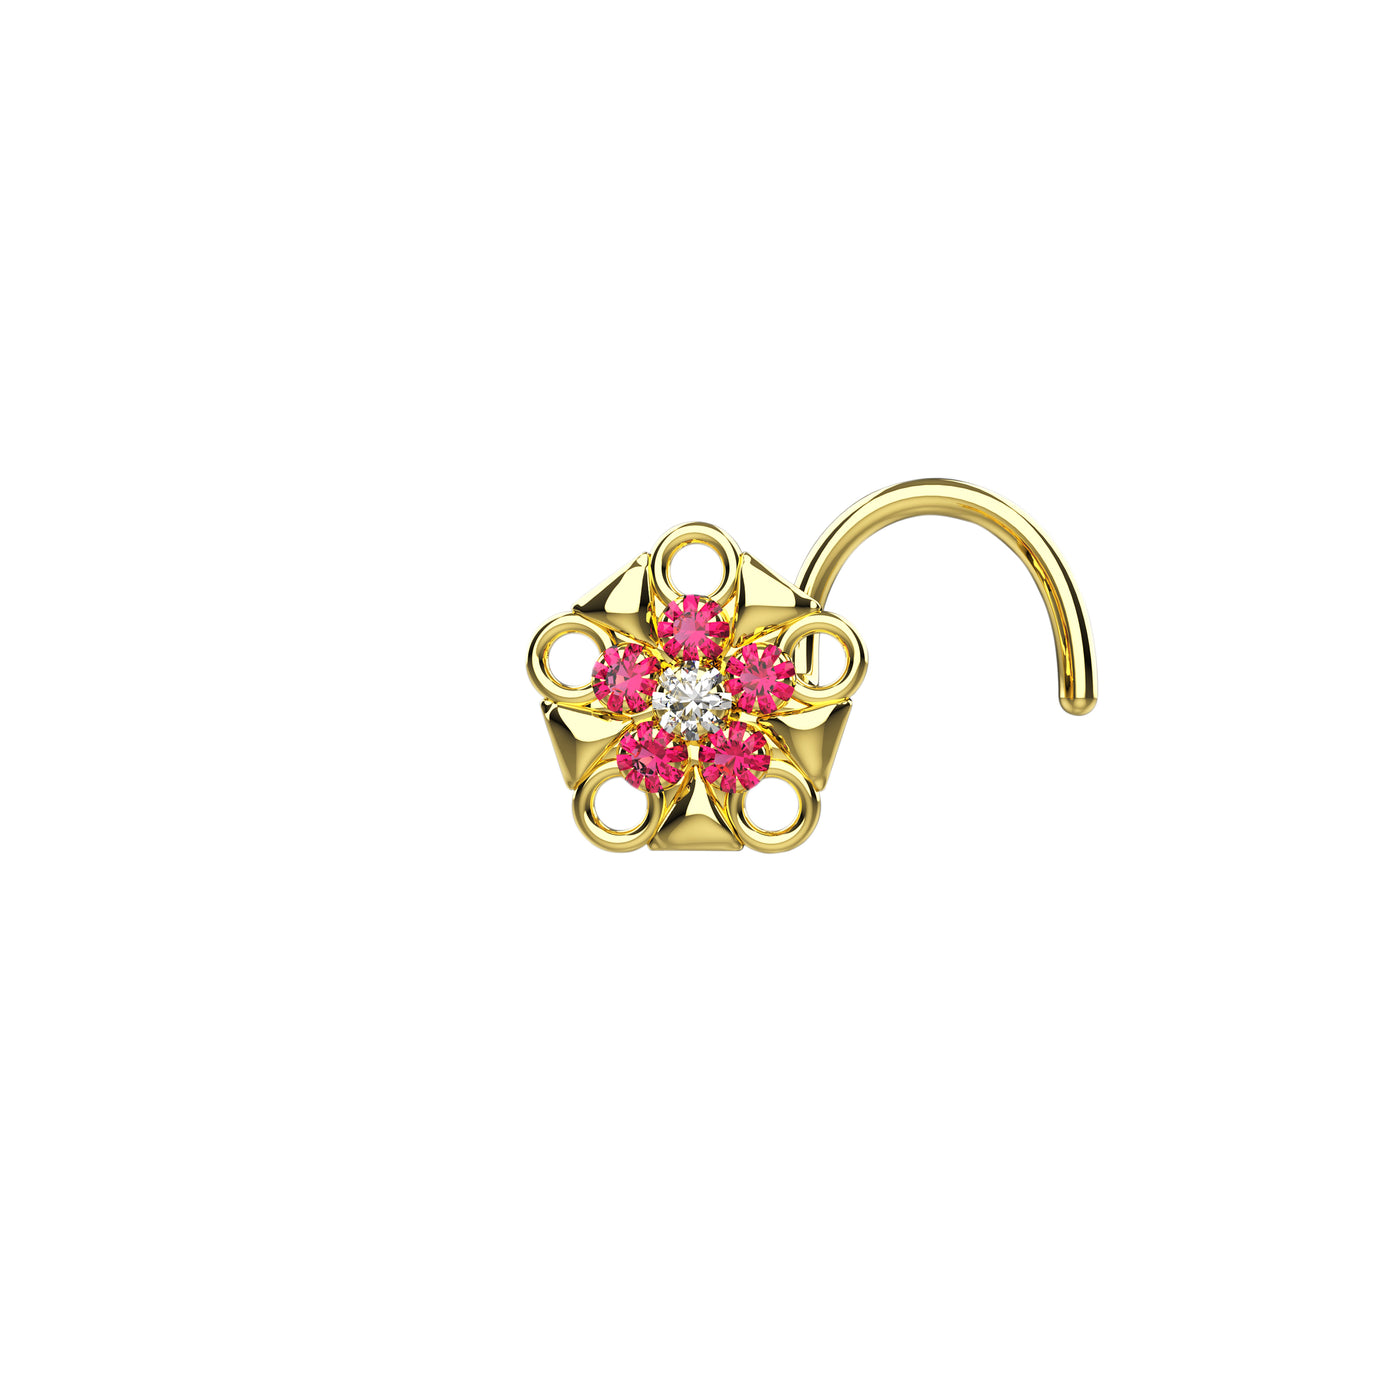 Nostril Ring 14k Gold Plated / 925 Solid Silver Nose Studs